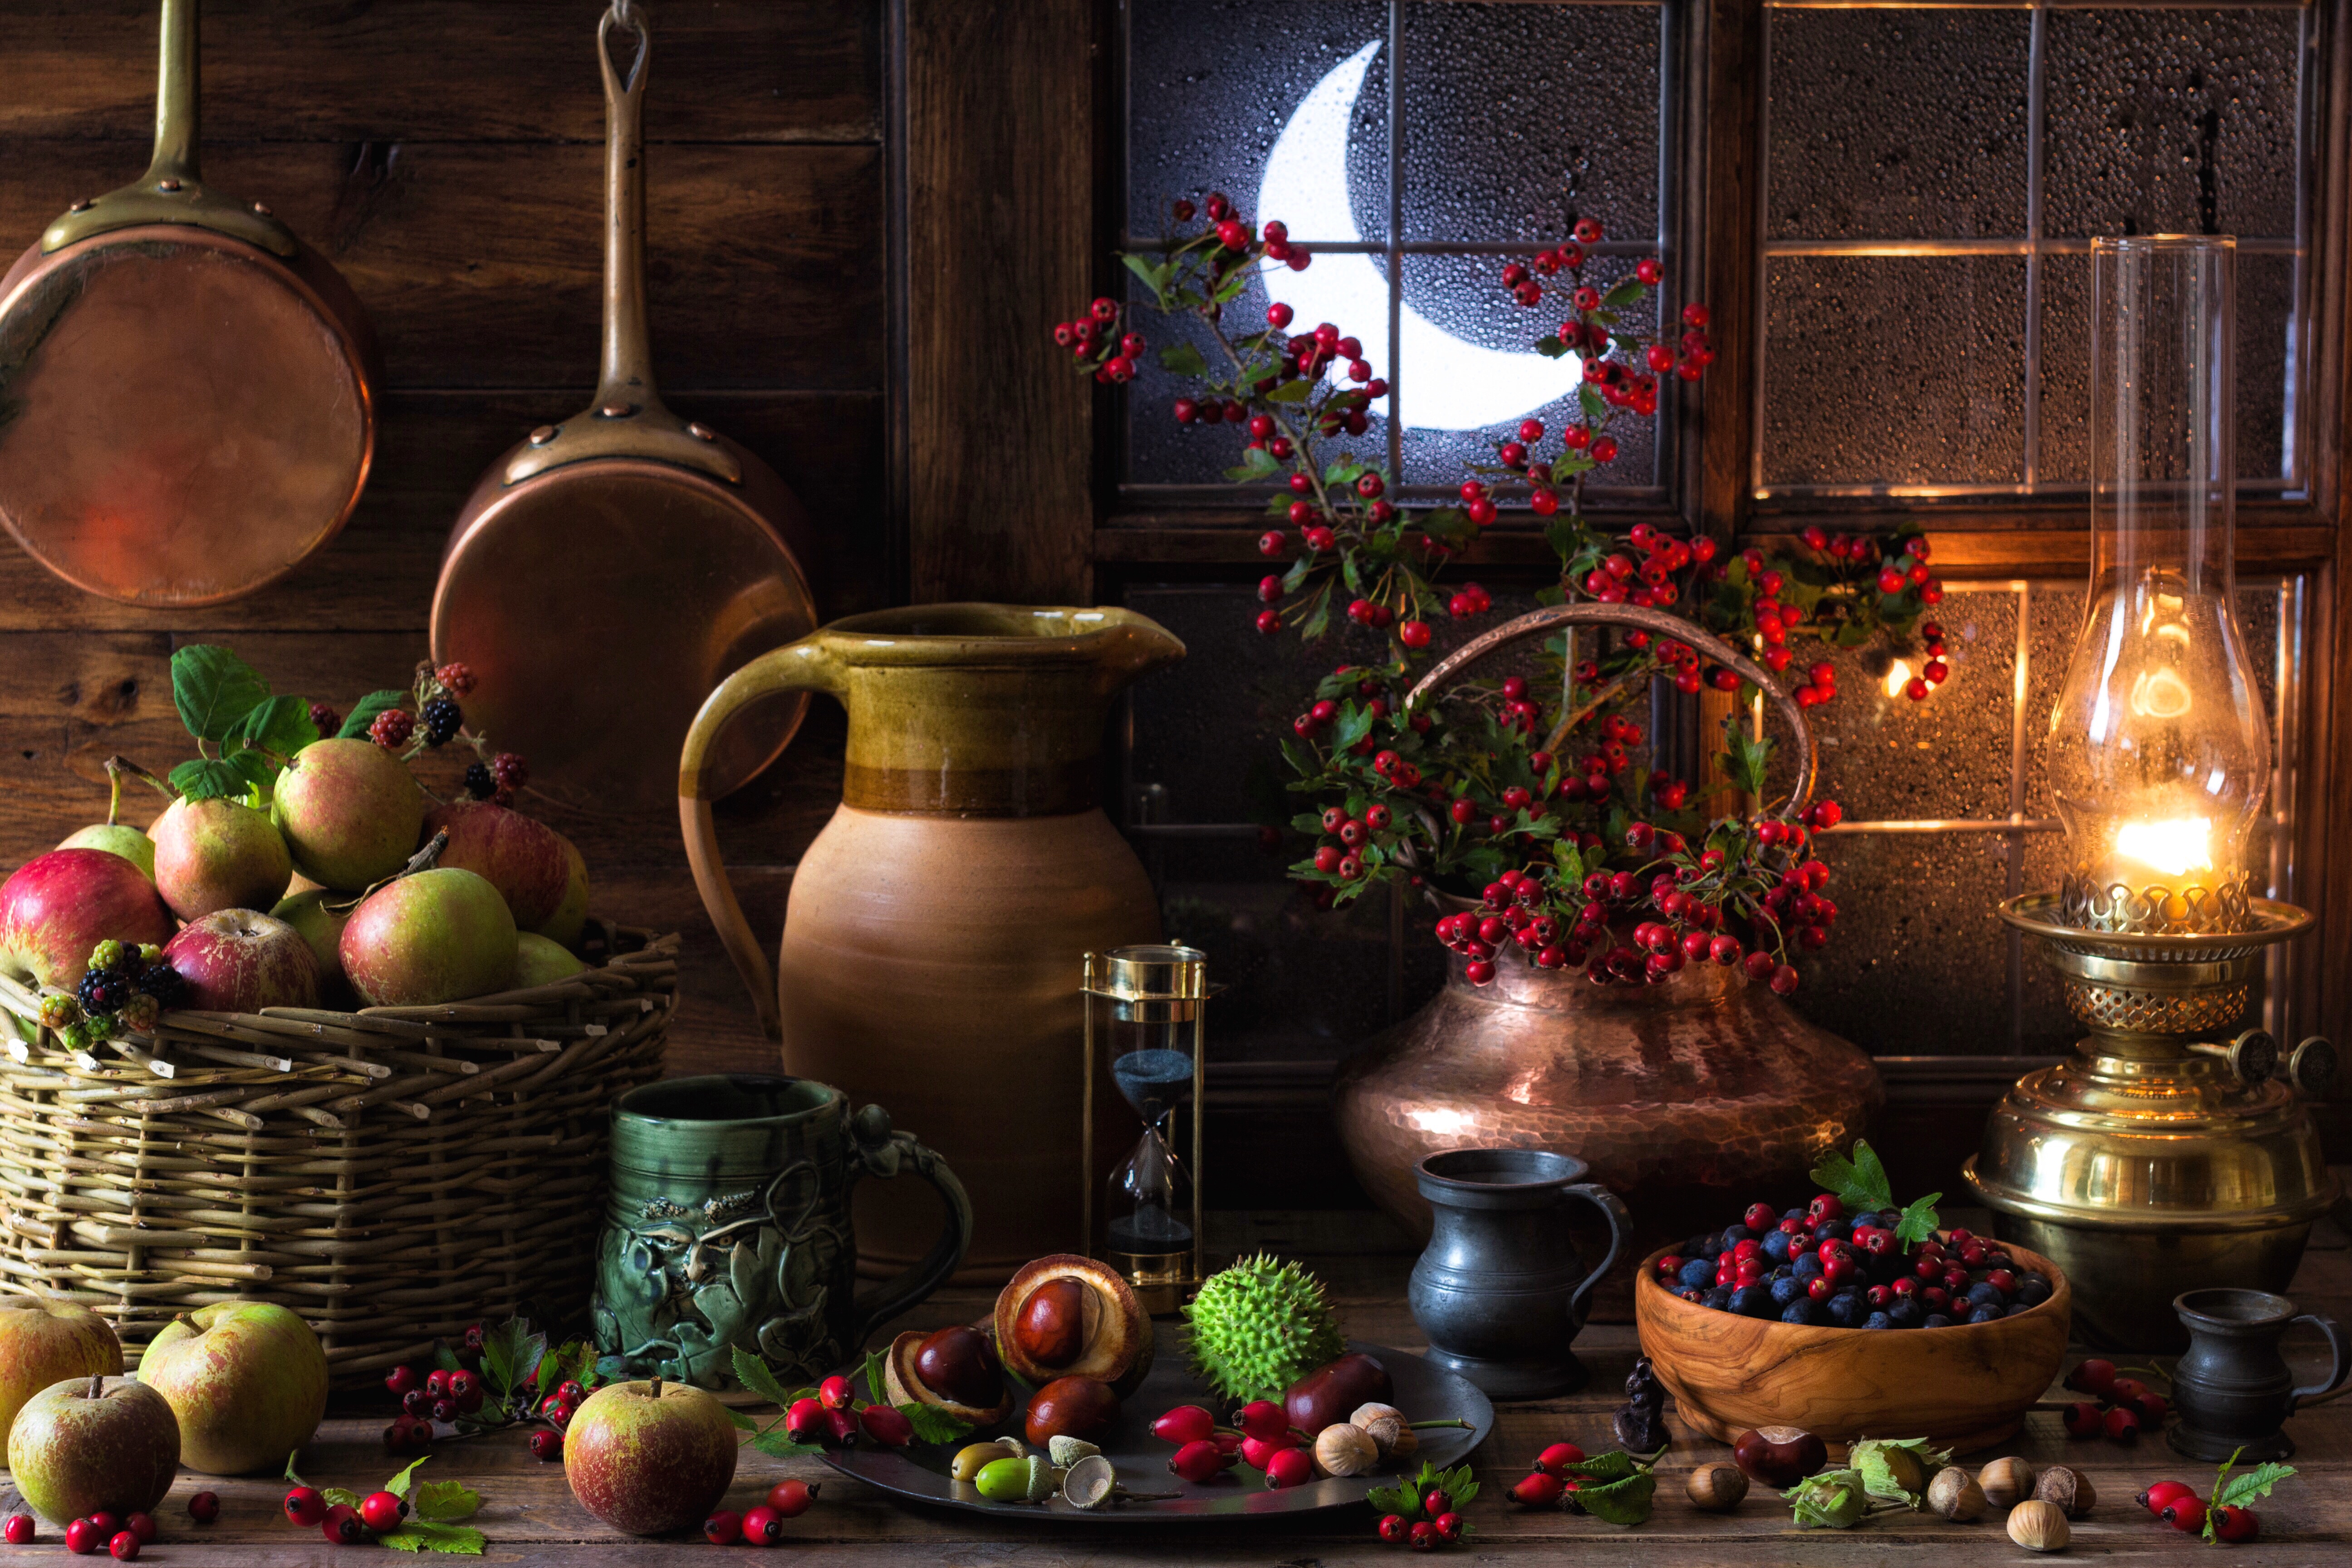 Autumn Still Life by Marcus Rodriguez